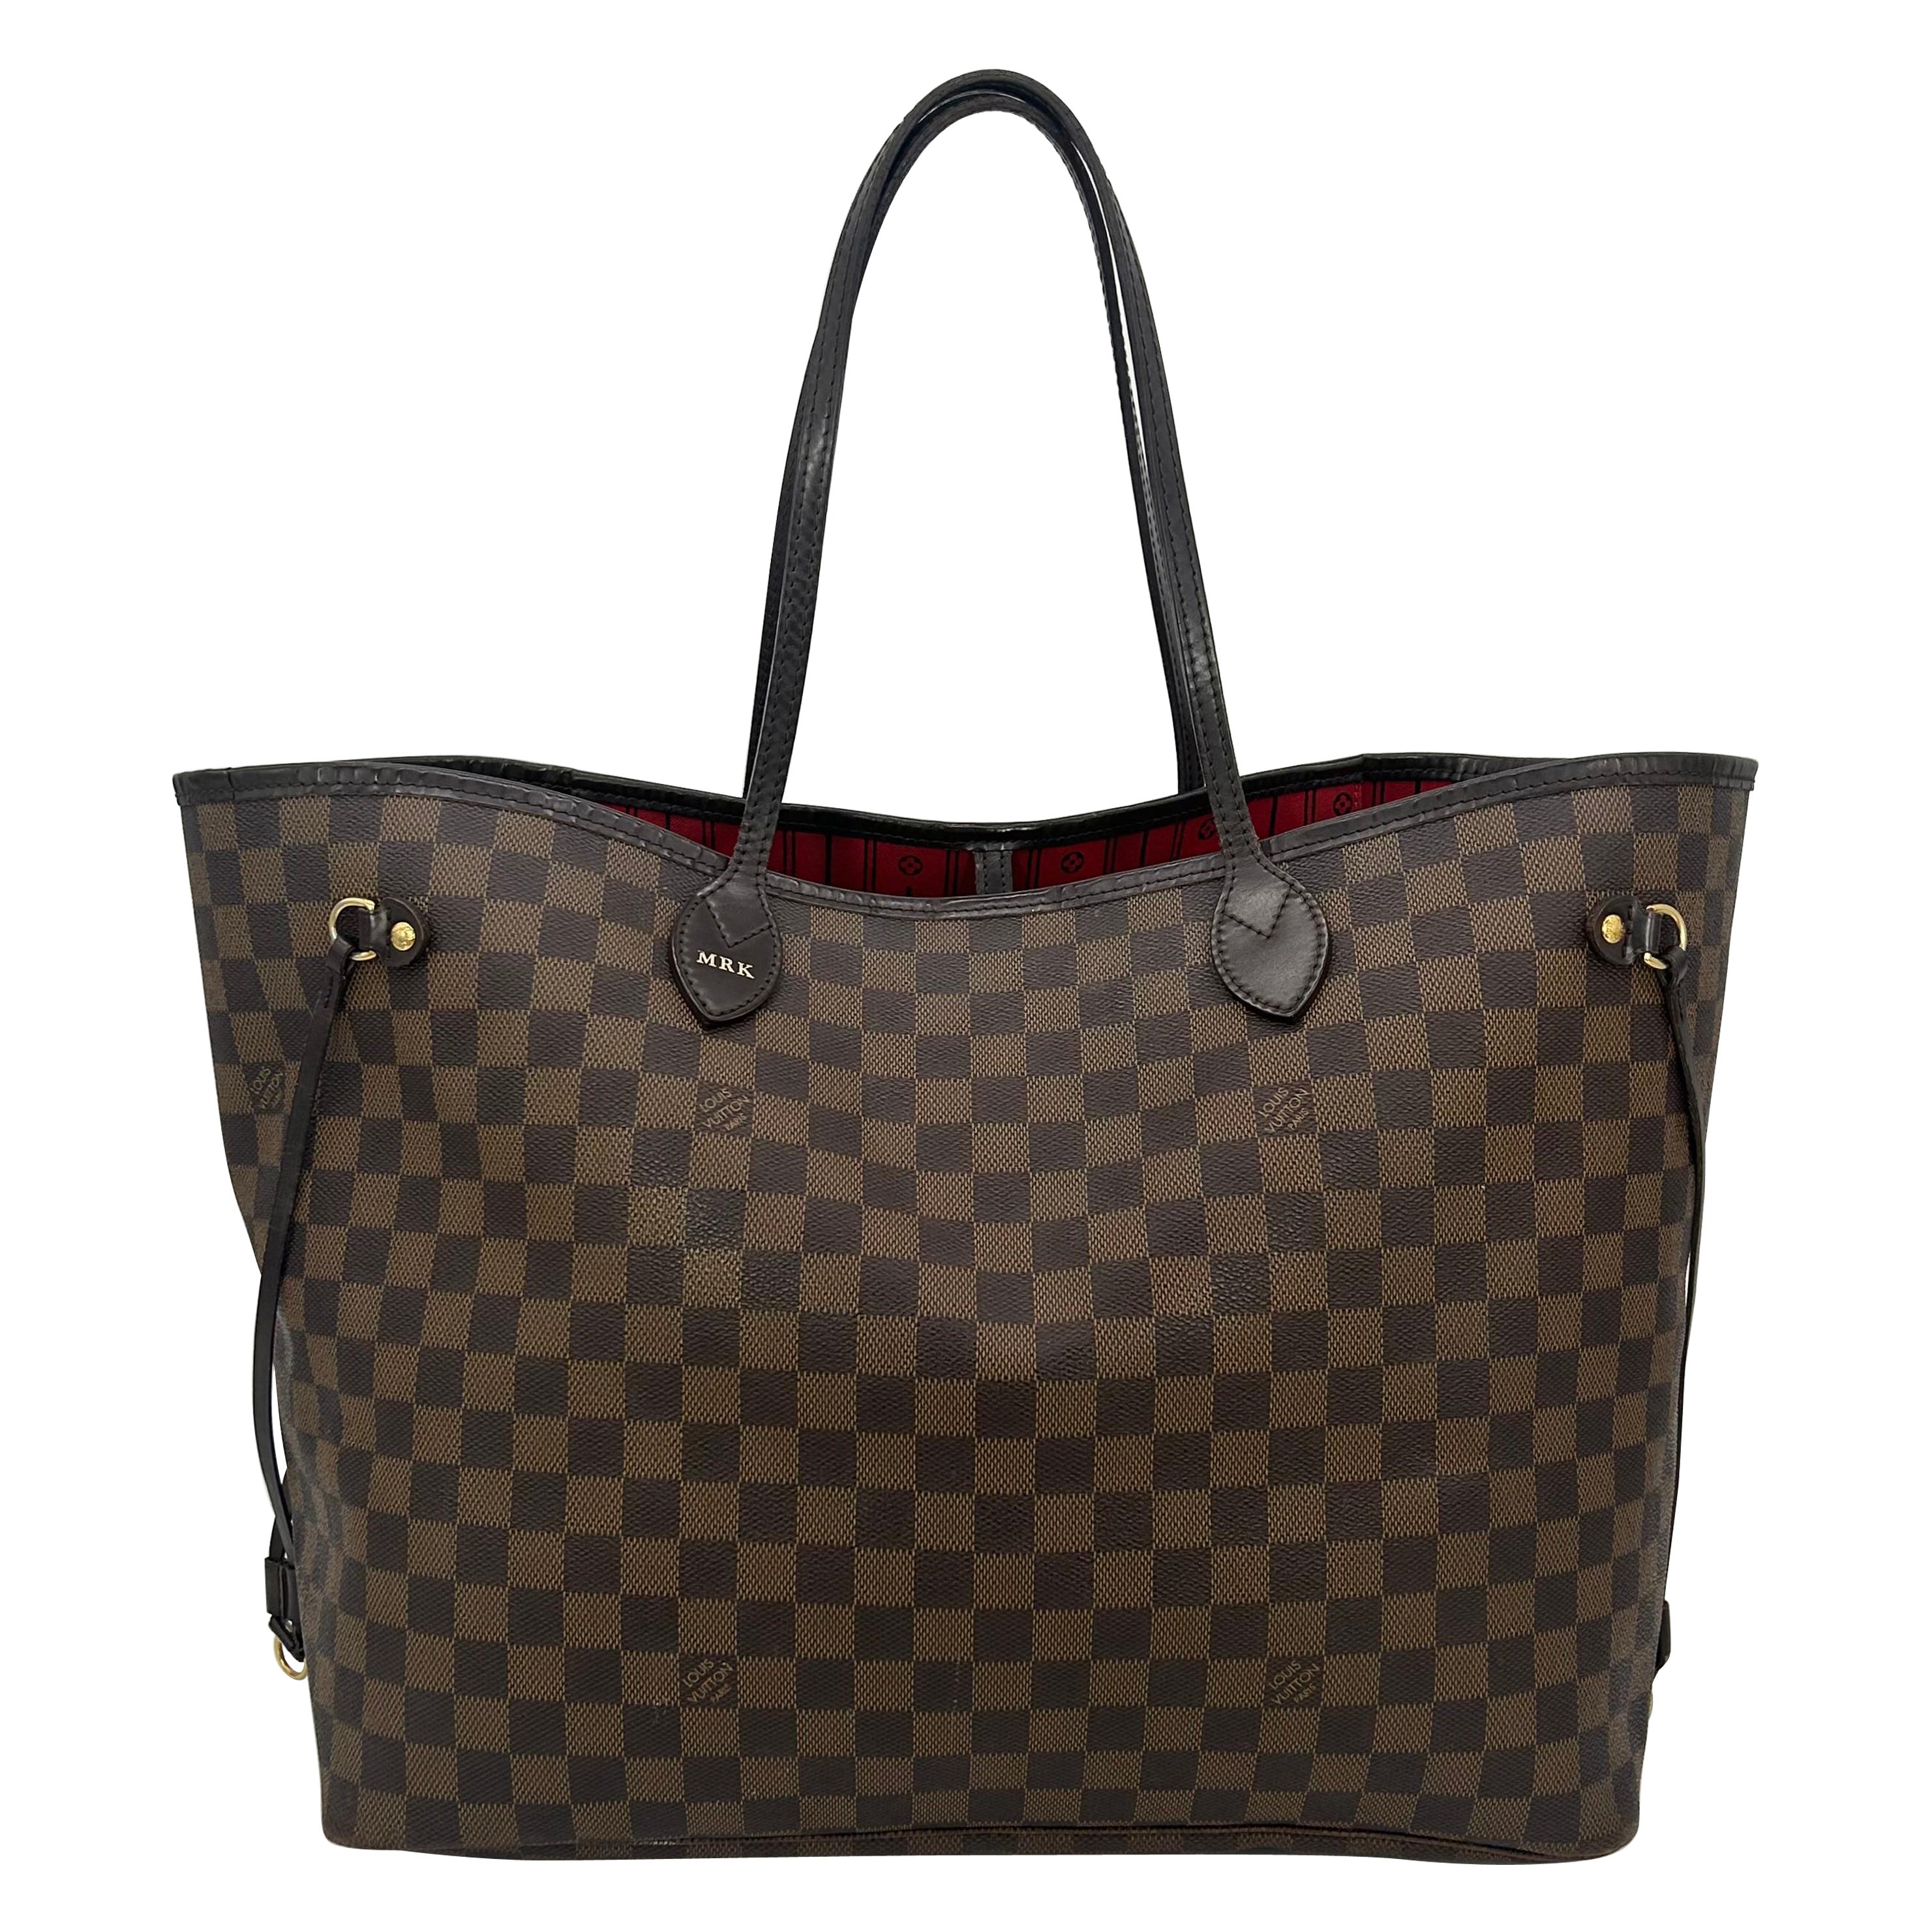 Does the Louis Vuitton Neverfull bag have a serial number?